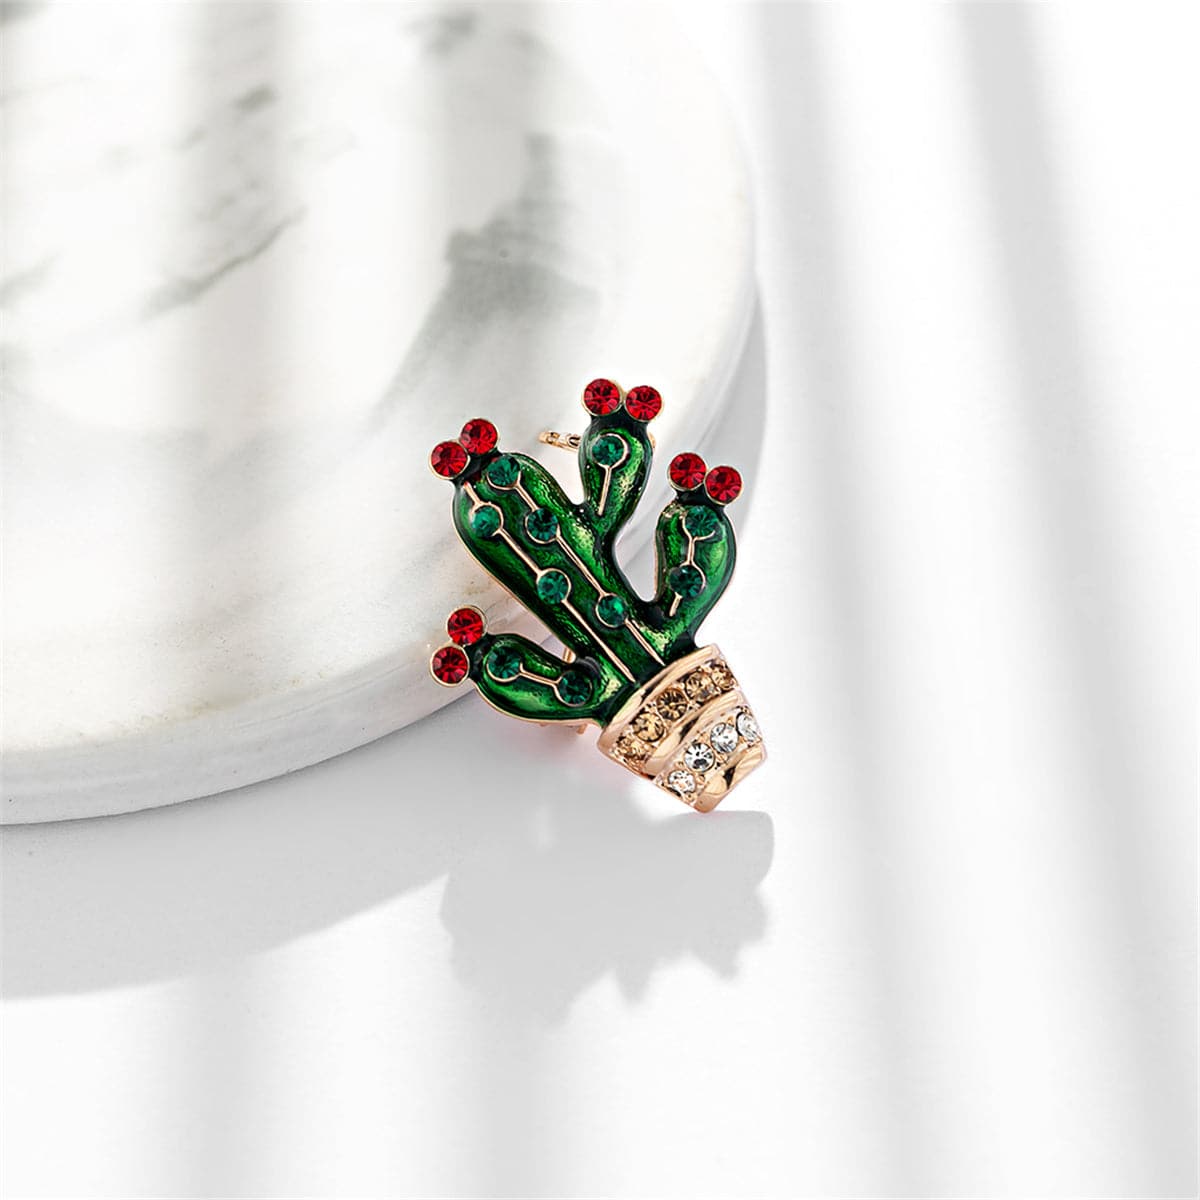 Cubic Zirconia & Gold-Plated Cactus Brooch